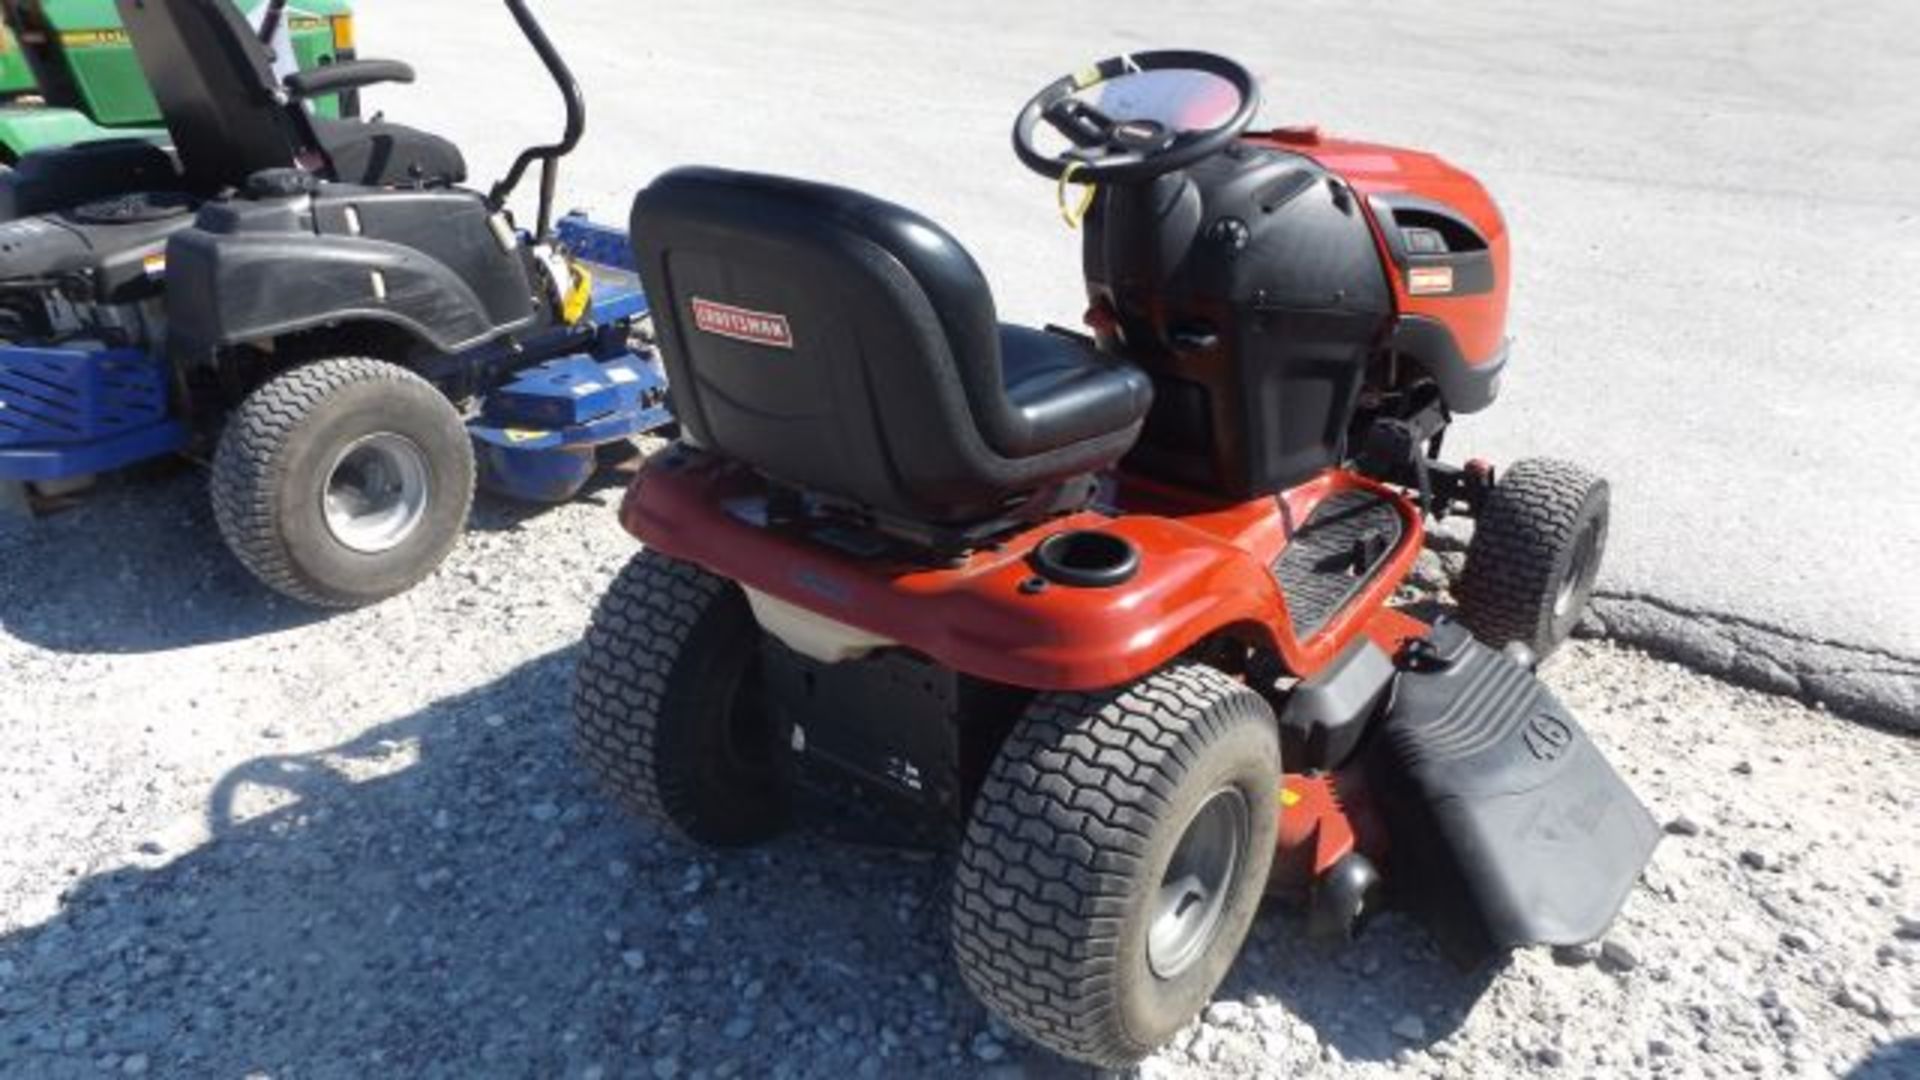 Craftsman YT4000 Mower #112134, 235 hrs, 46" Deck, 24hp Briggs, Air Cooled, Hydro, sn#020712A003792 - Image 3 of 3